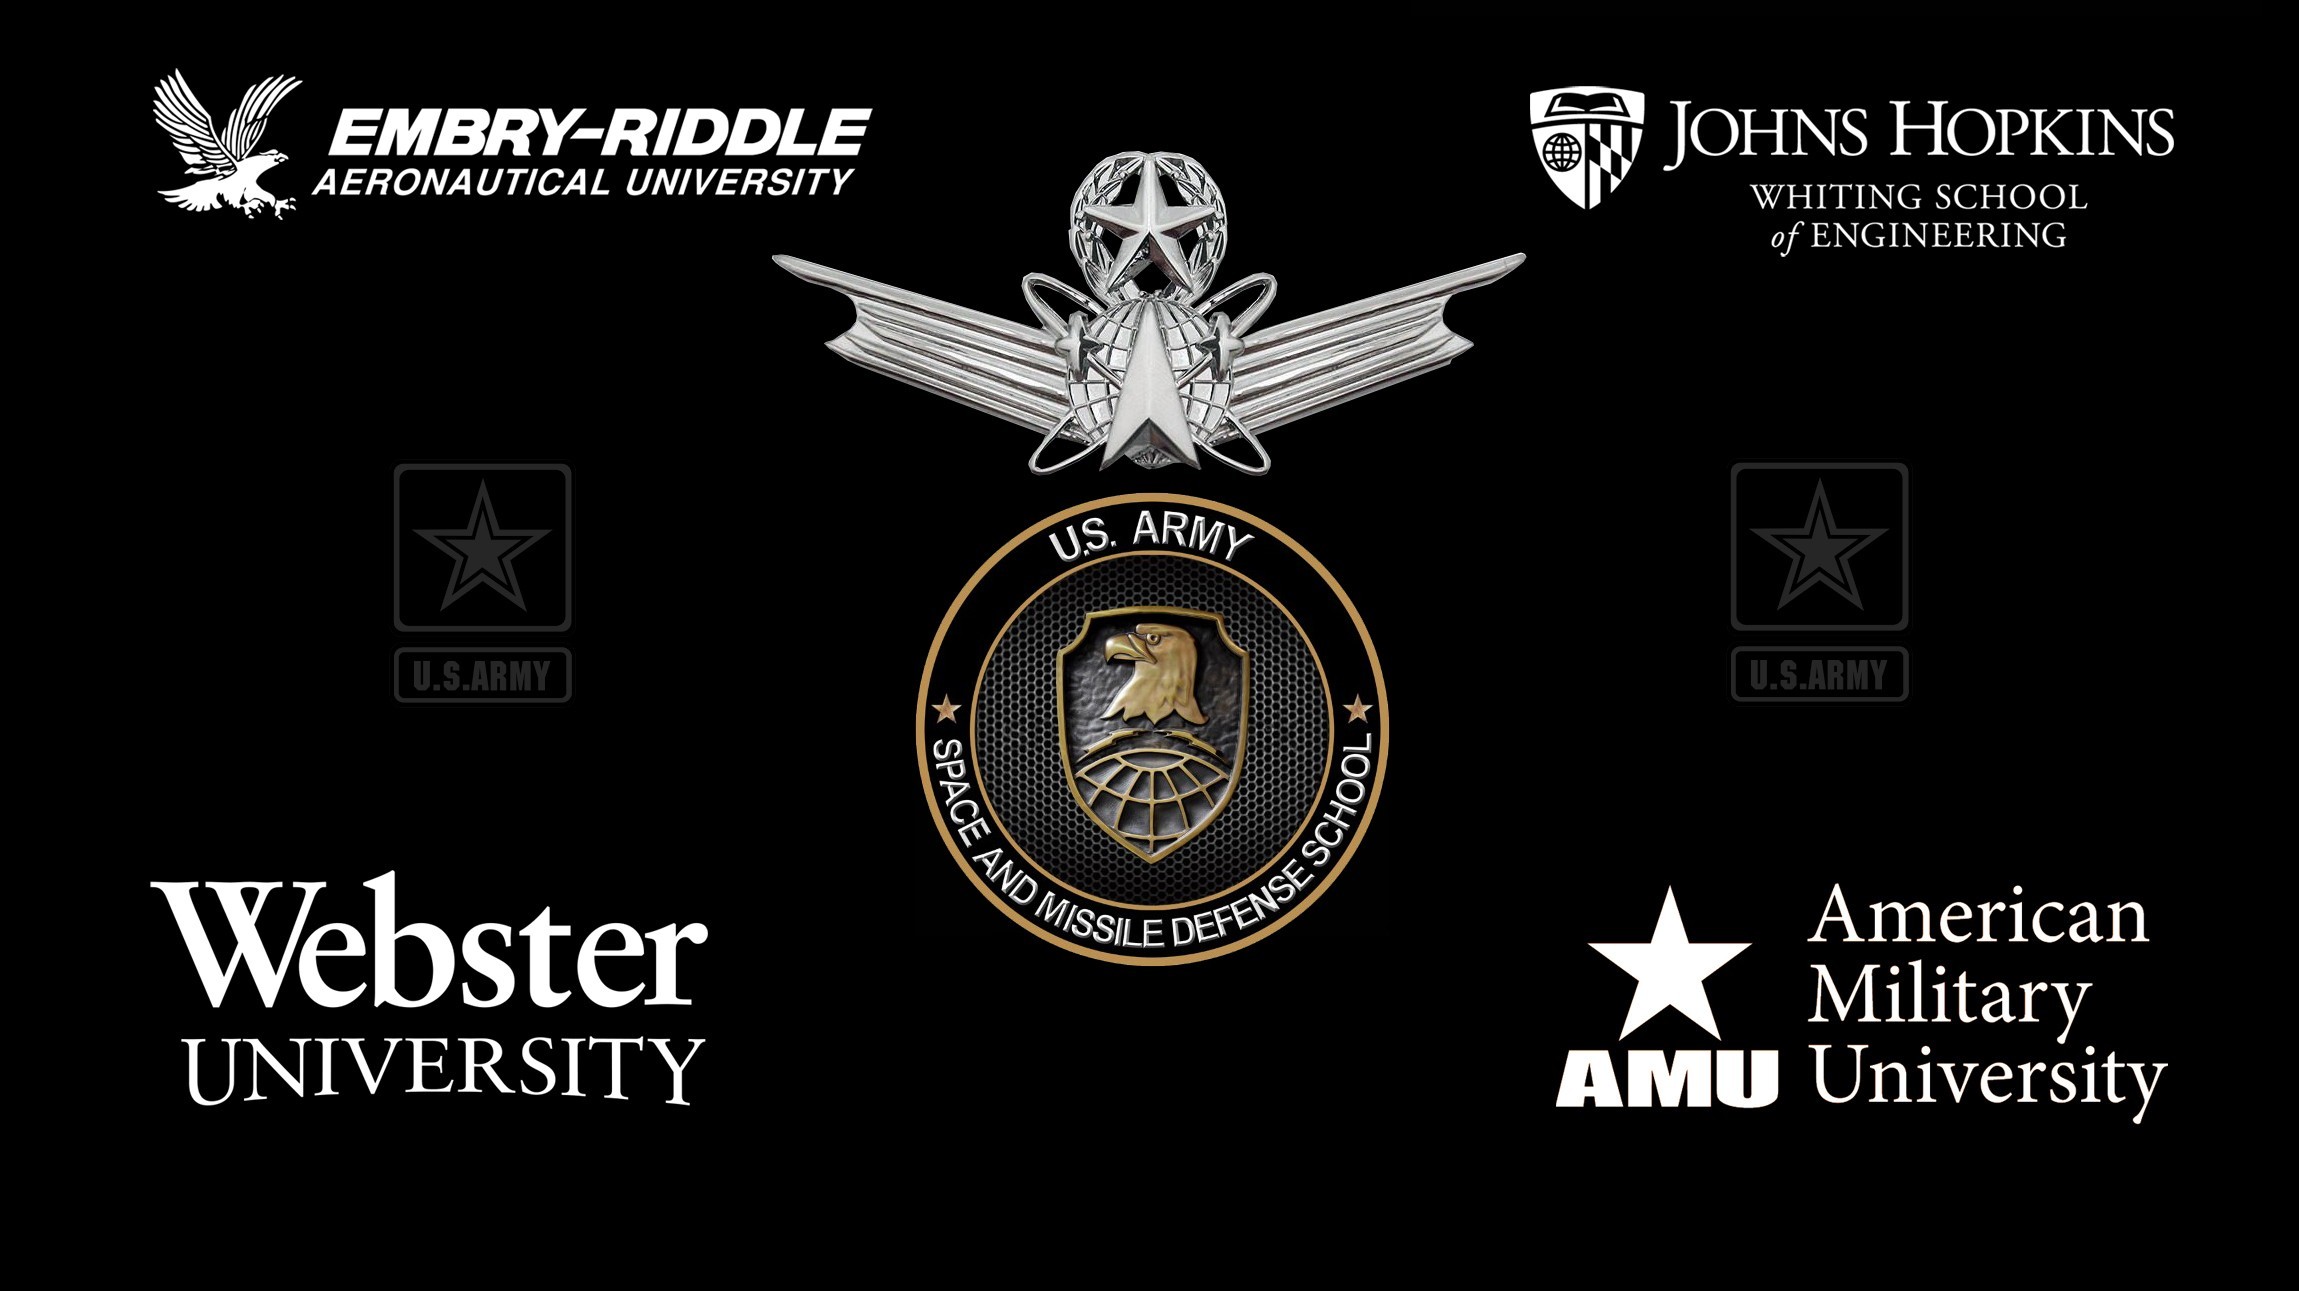 Space Officers Gain Transfer Credits Toward Space Related Master's Degrees. Article. The United States Army